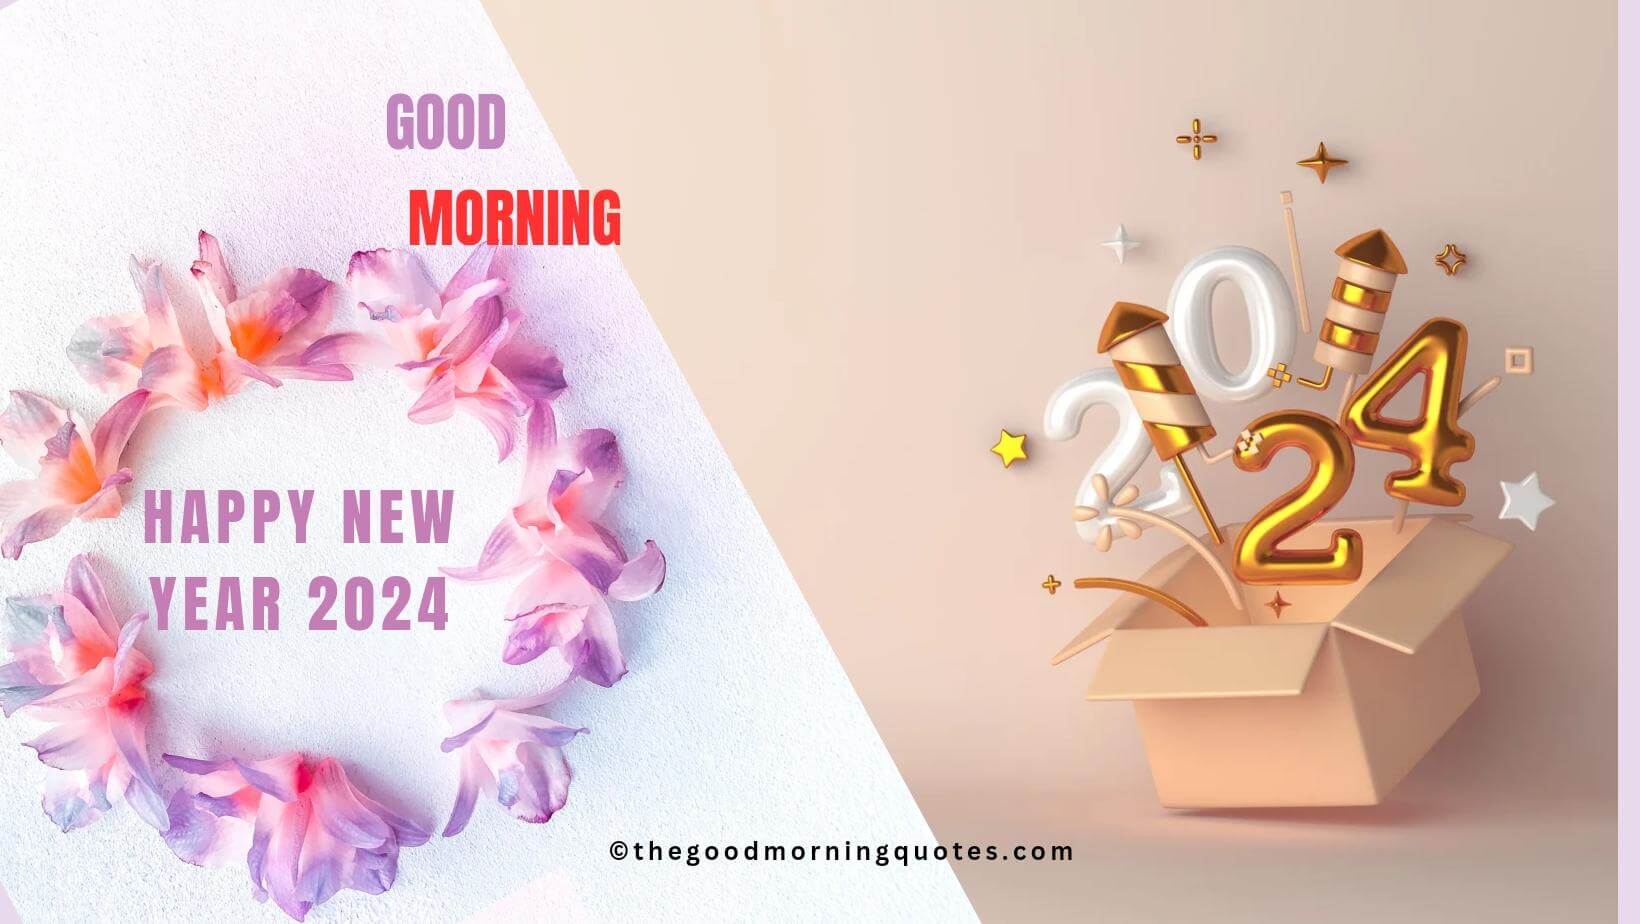 Happy New Year Wishes with Images